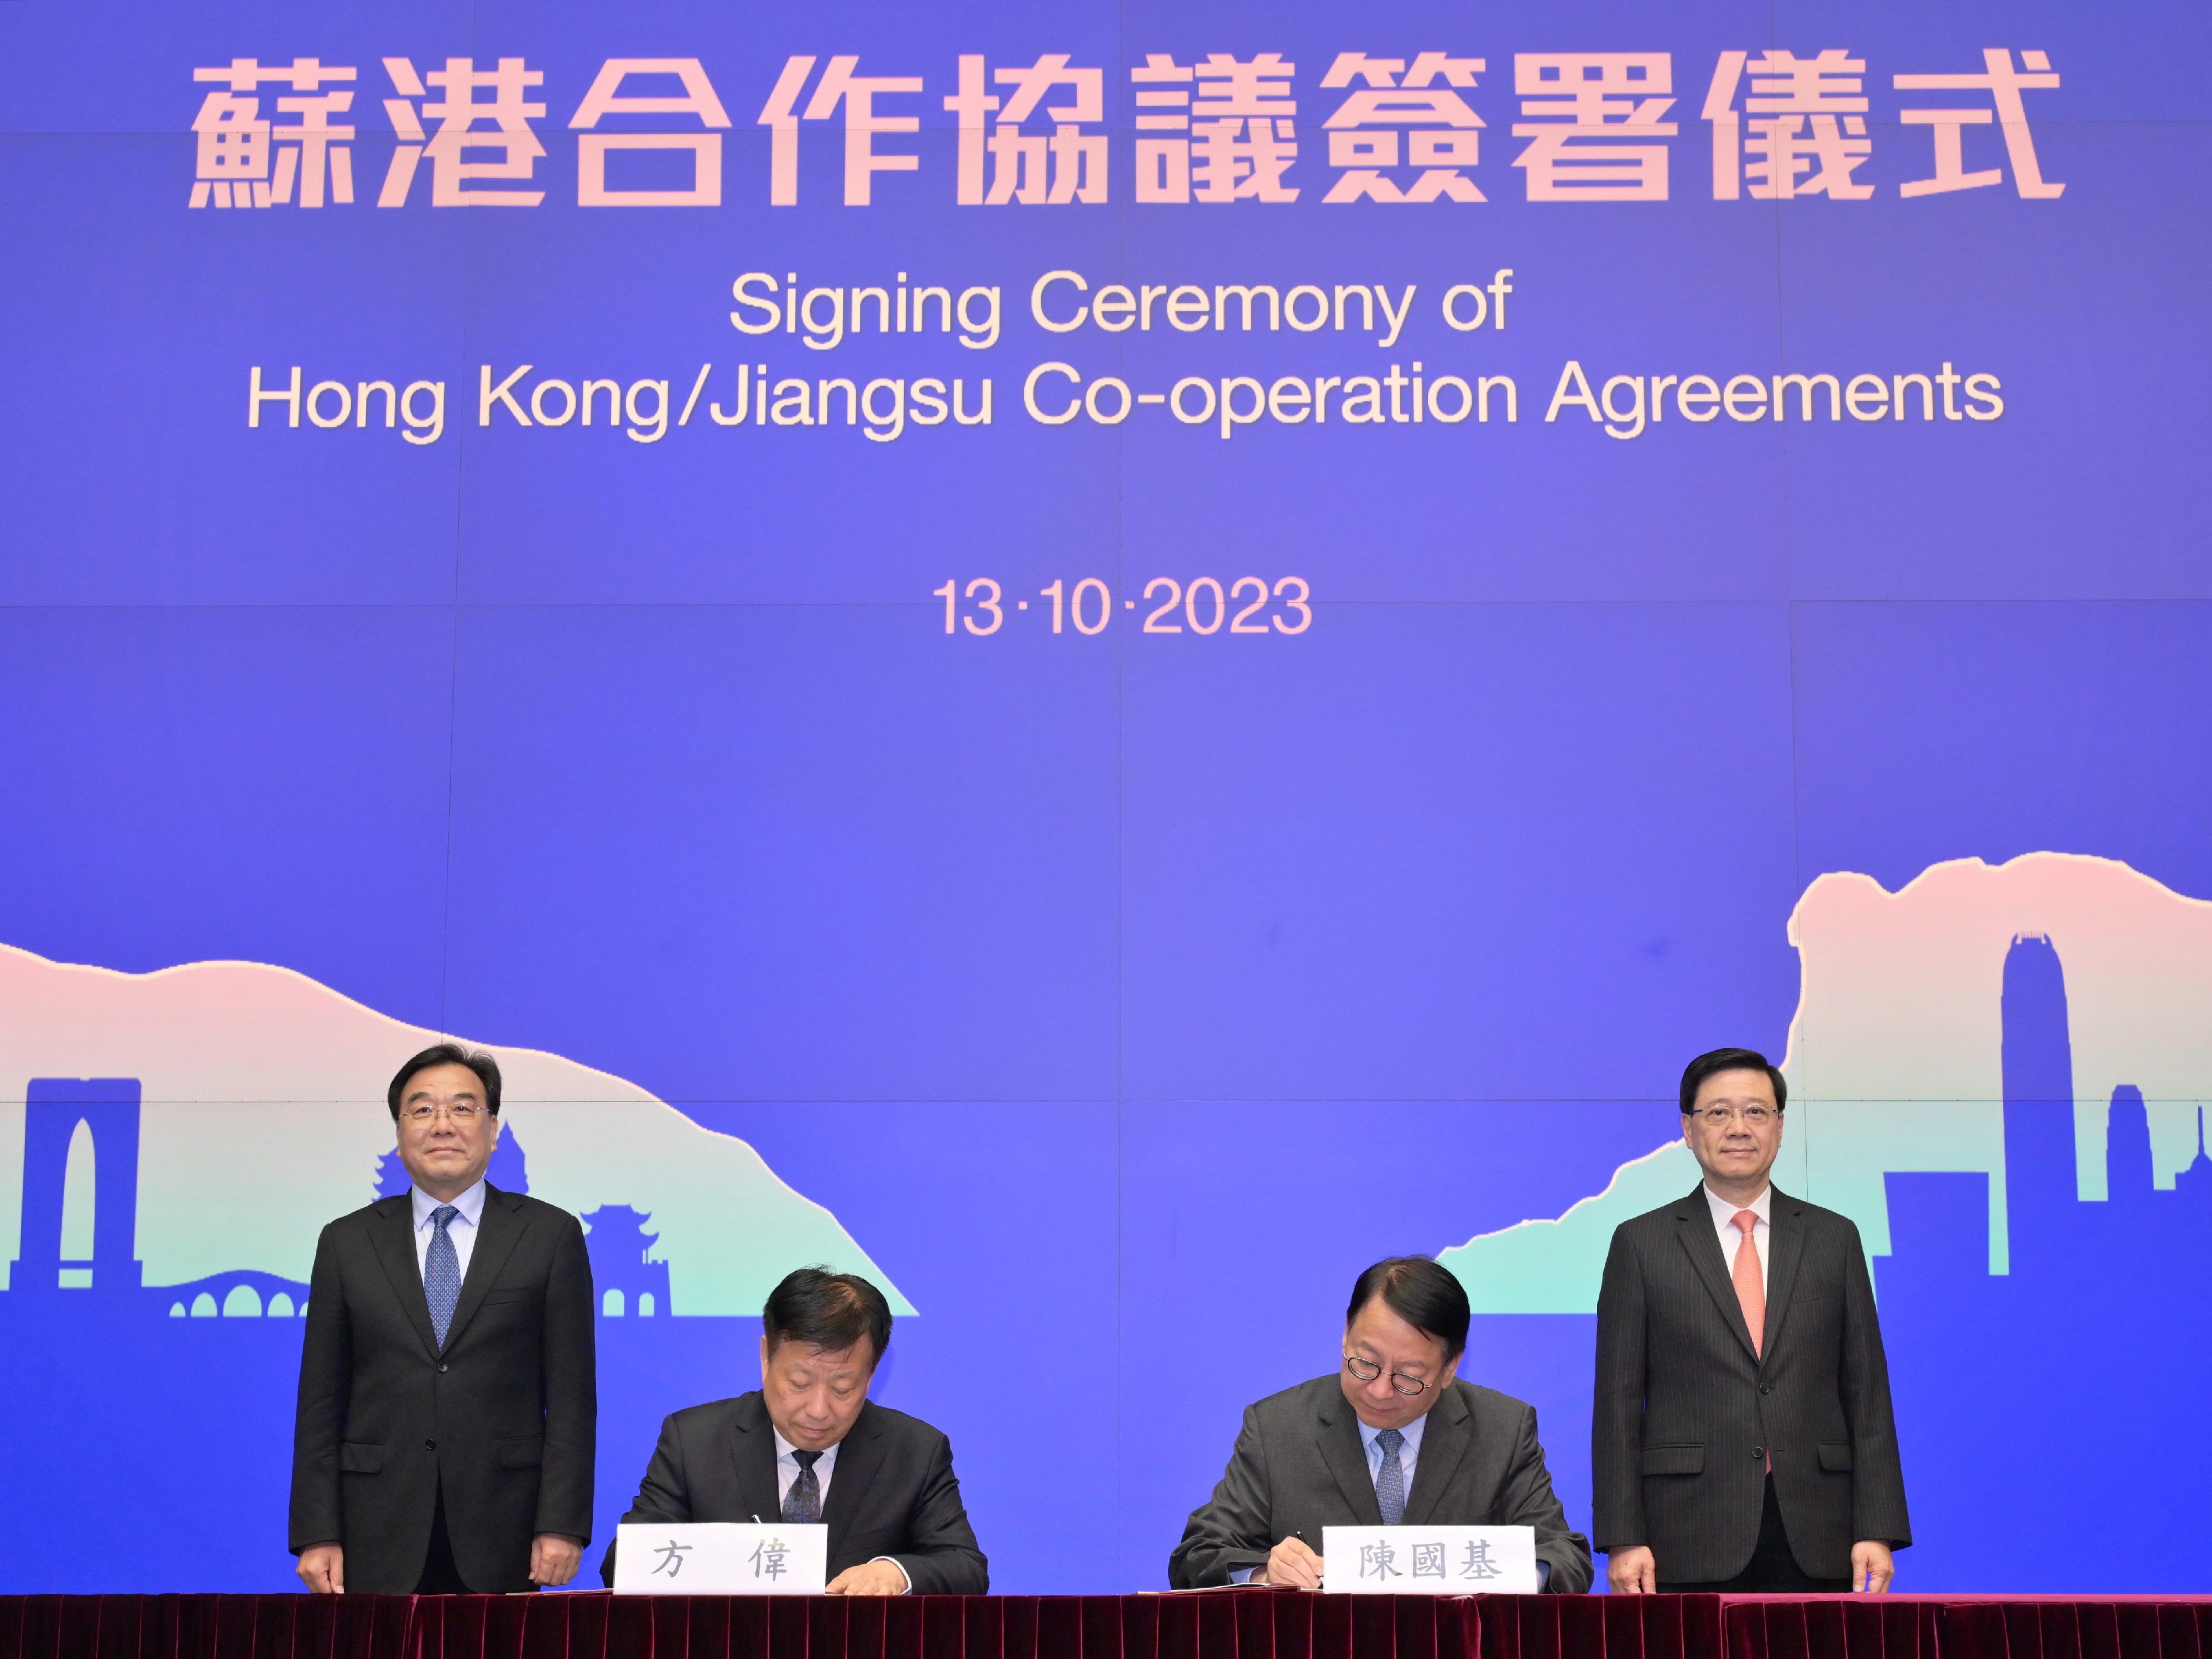 The Chief Executive, Mr John Lee, and the Secretary of the CPC Jiangsu Provincial Committee, Mr Xin Changxing, leading the delegations of the governments of the Hong Kong Special Administrative Region and Jiangsu respectively, held the High-Level Meeting cum Signing Ceremony of Hong Kong/Jiangsu Co-operation Agreements in Hong Kong today (October 13). Photo shows Mr Lee (back row, right) and Mr Xin (back row, left) witnessing the signing of the "Co-operation Agreement between the People’s Government of Jiangsu Province and the Government of the Hong Kong Special Administration Region on Deepening the Exchange of Jiangsu and Hong Kong" by the Chief Secretary for Administration, Mr Chan Kwok-ki (front row, right), and the Vice Governor of Jiangsu Provincial People's Government Mr Fang Wei (front row, left).